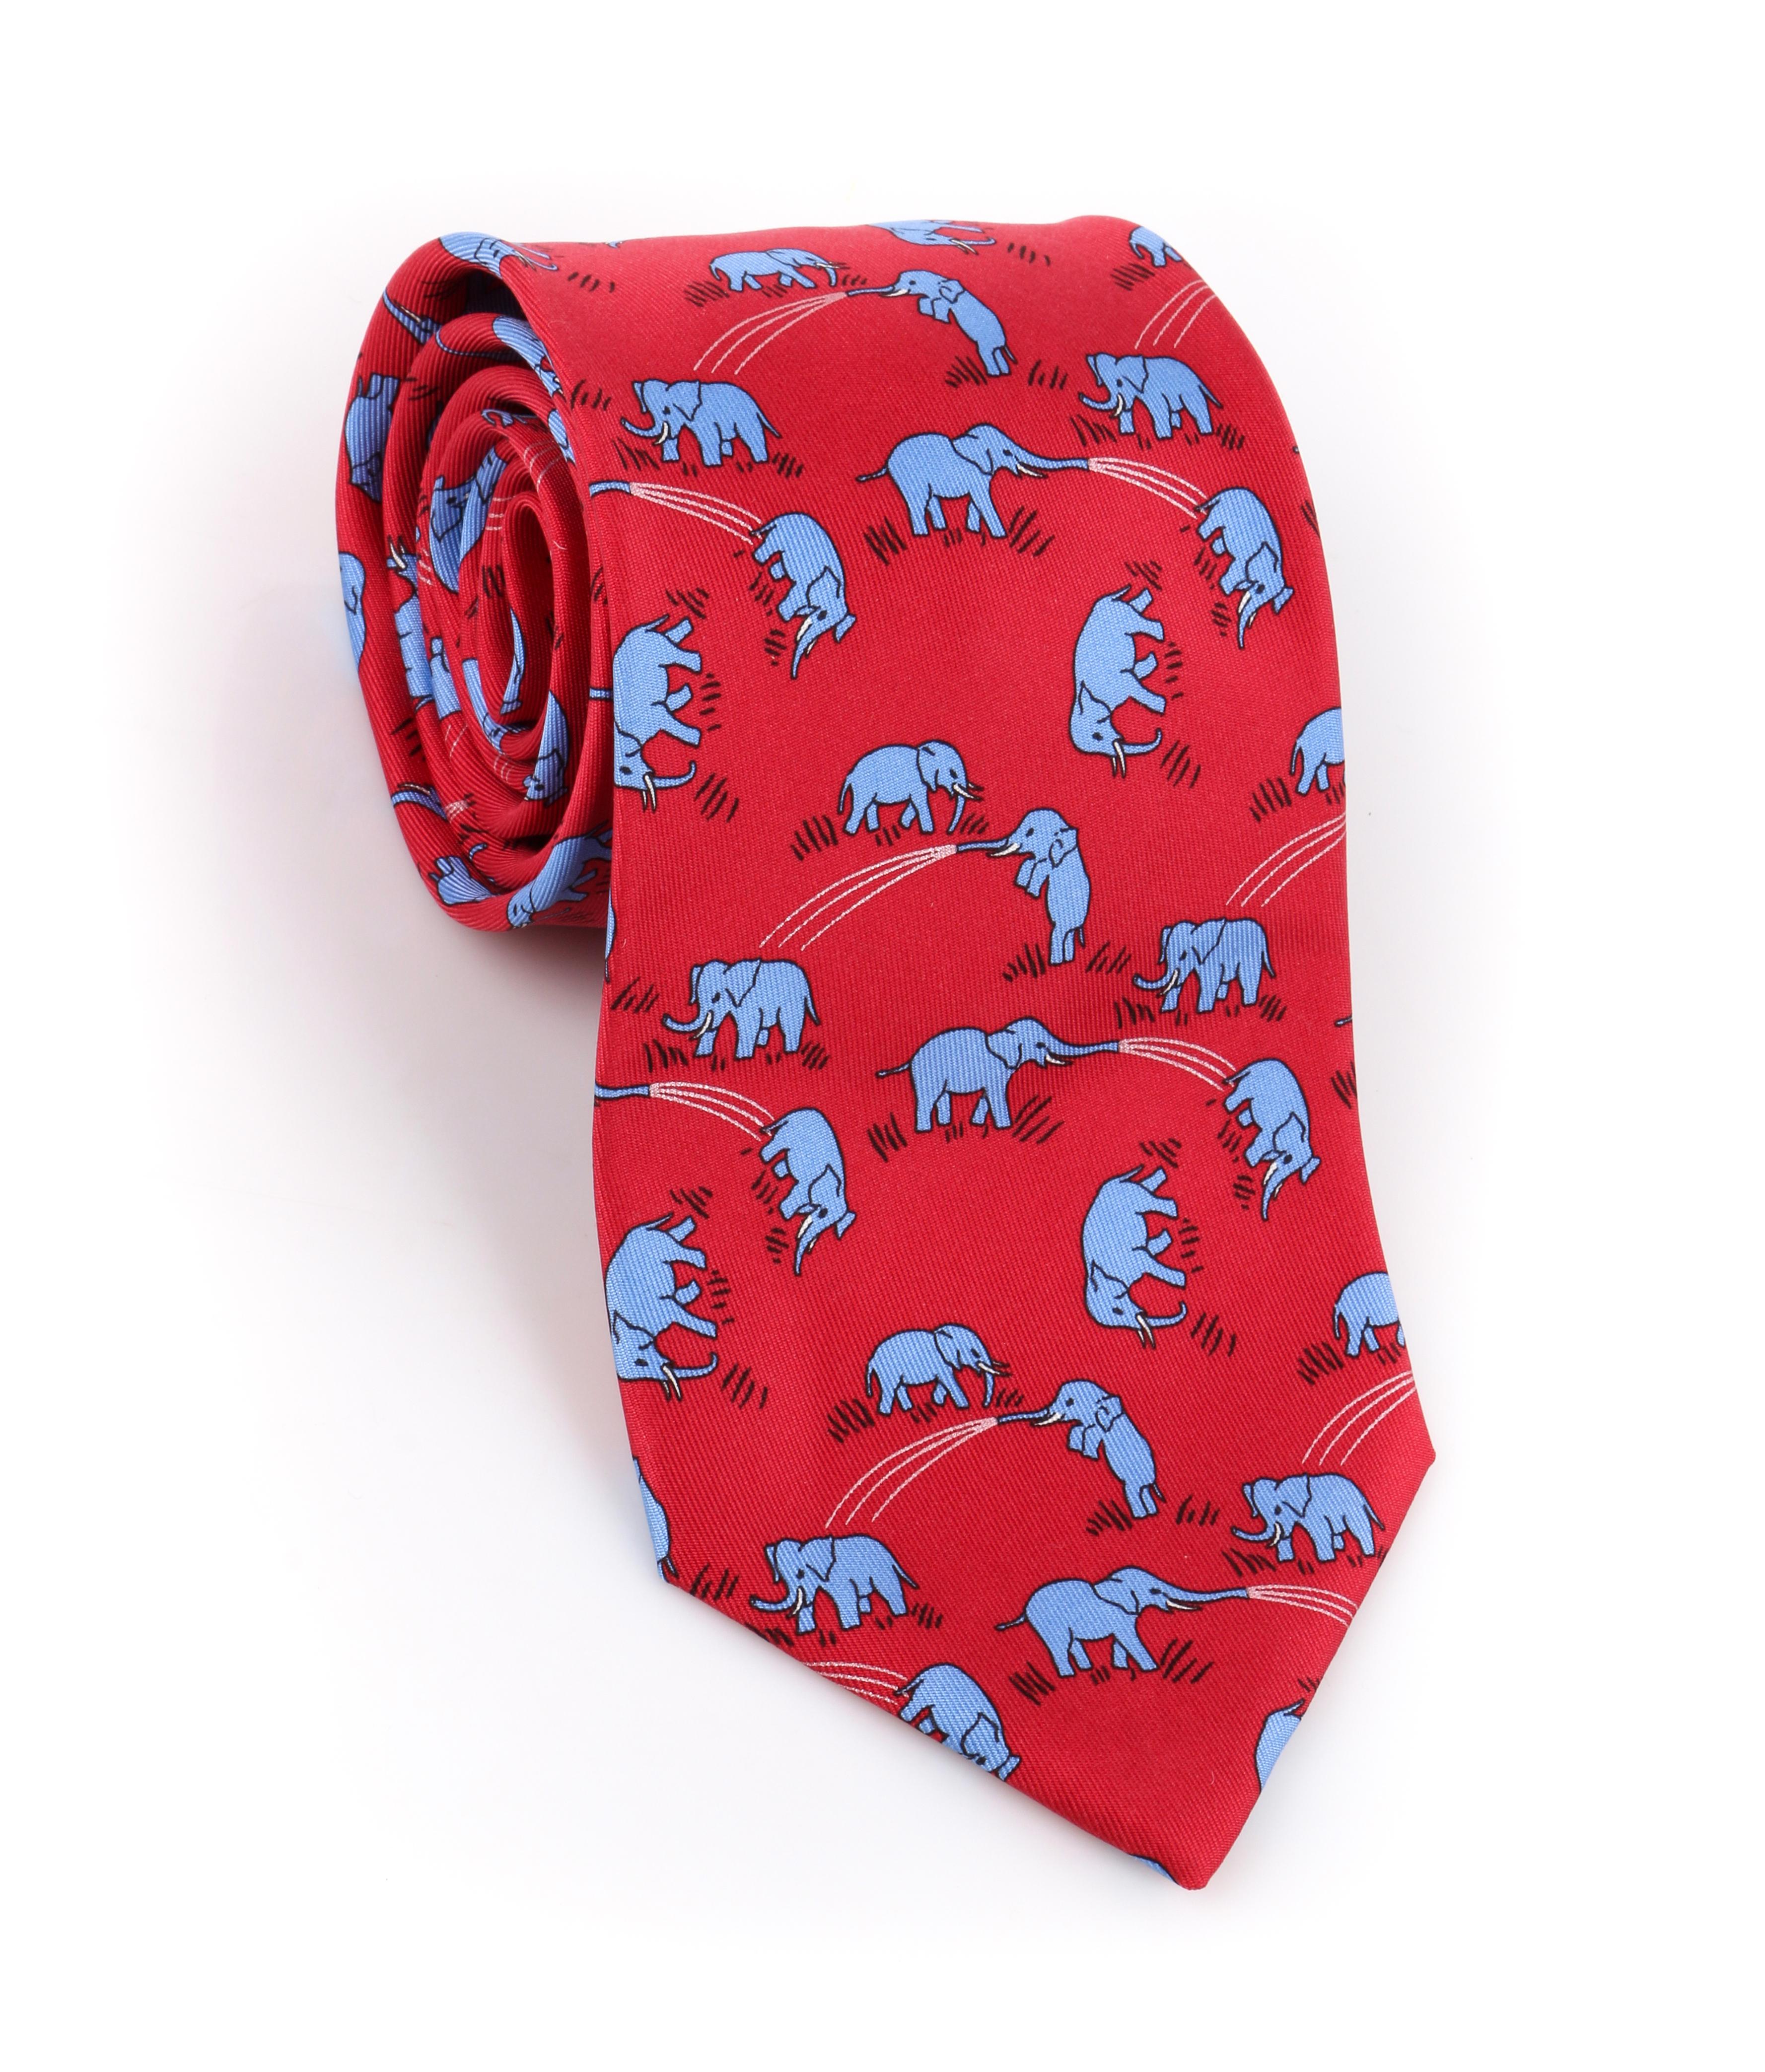 DESCRIPTION: HERMES Red & Blue Elephant Print 5 Fold Silk Necktie Tie 7111 OA
 
Brand / Manufacturer: Hermes
Collection: 
Designer: 
Manufacturer Style Name: 
Style: Necktie 
Color(s): Red, blue, black, and white
Lined: Yes
Marked Fabric Content: